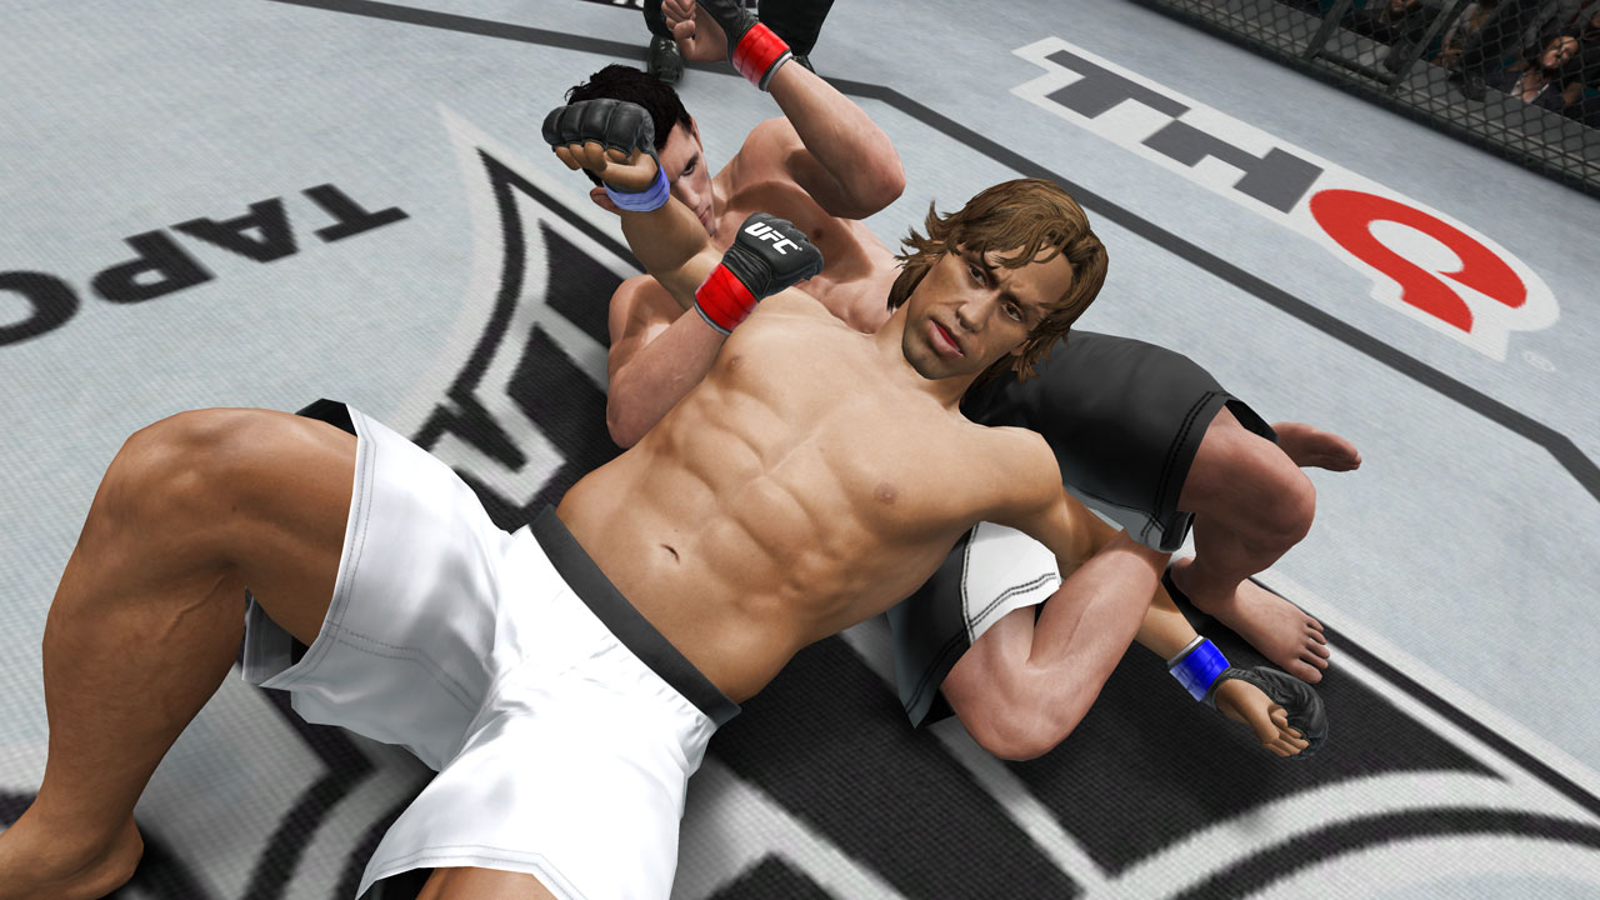 do a submission in ufc 3